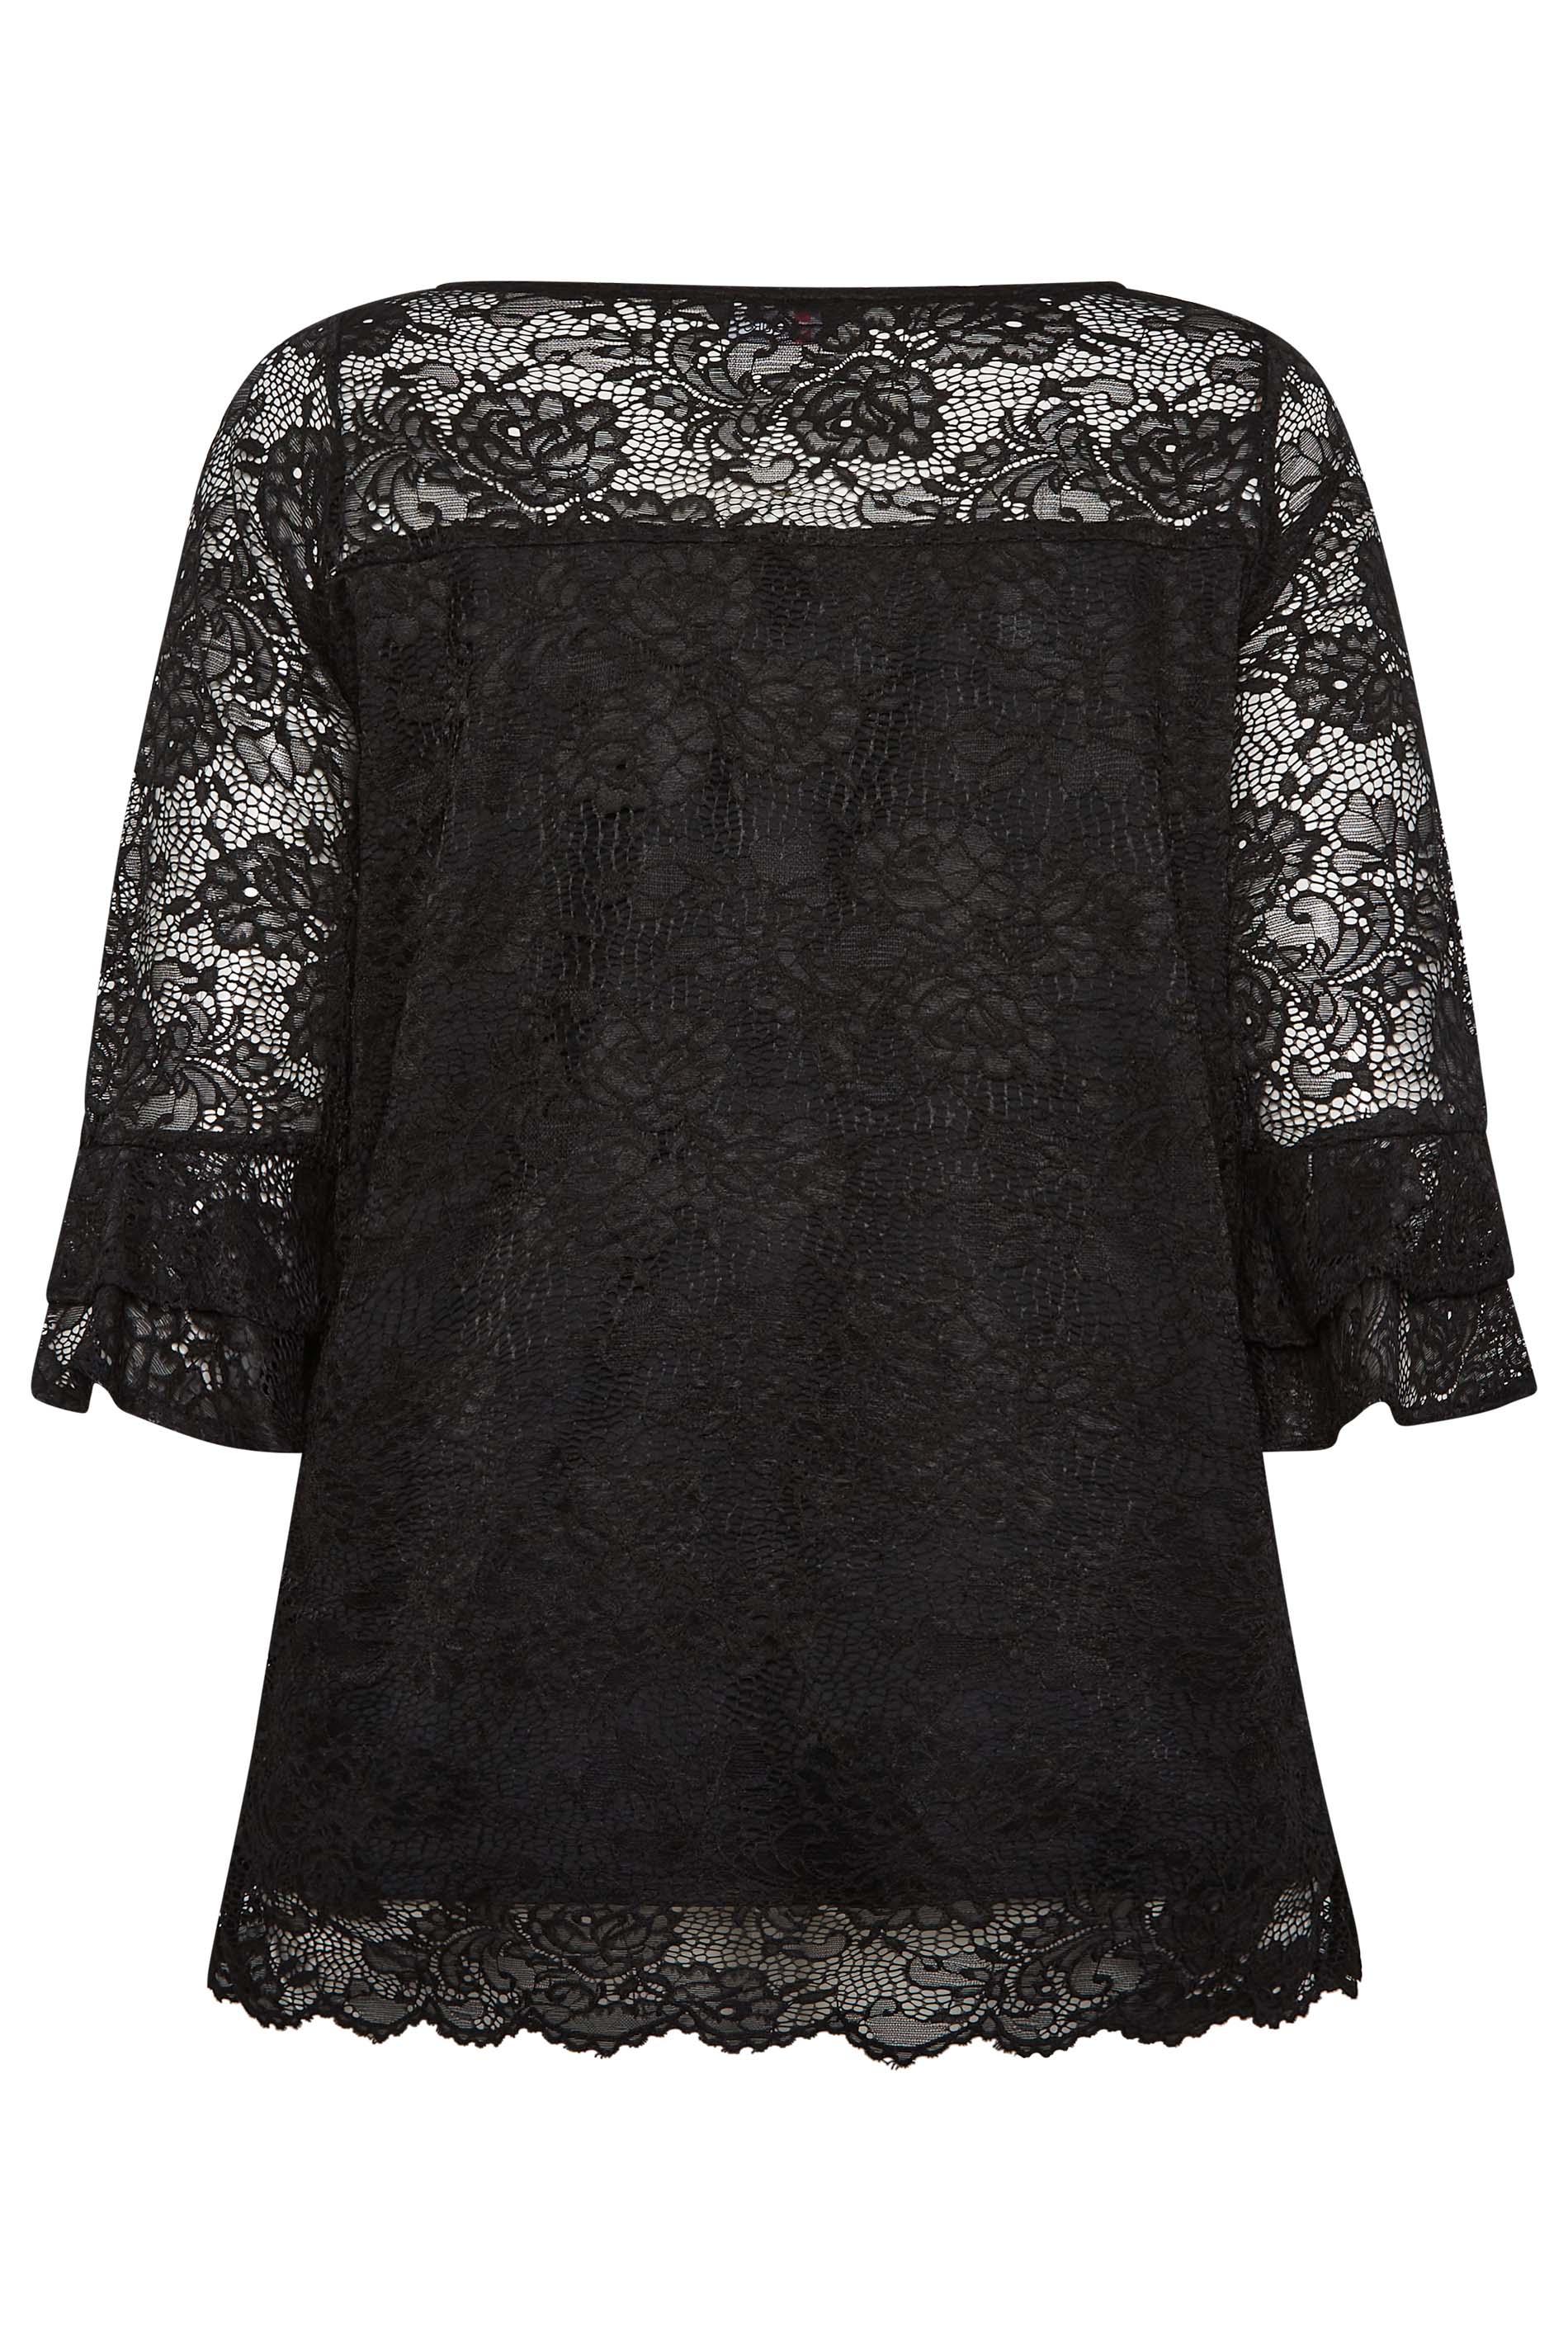 Beautiful black lace blouse So freaking gorgeous 🖤 Length-22 Bust